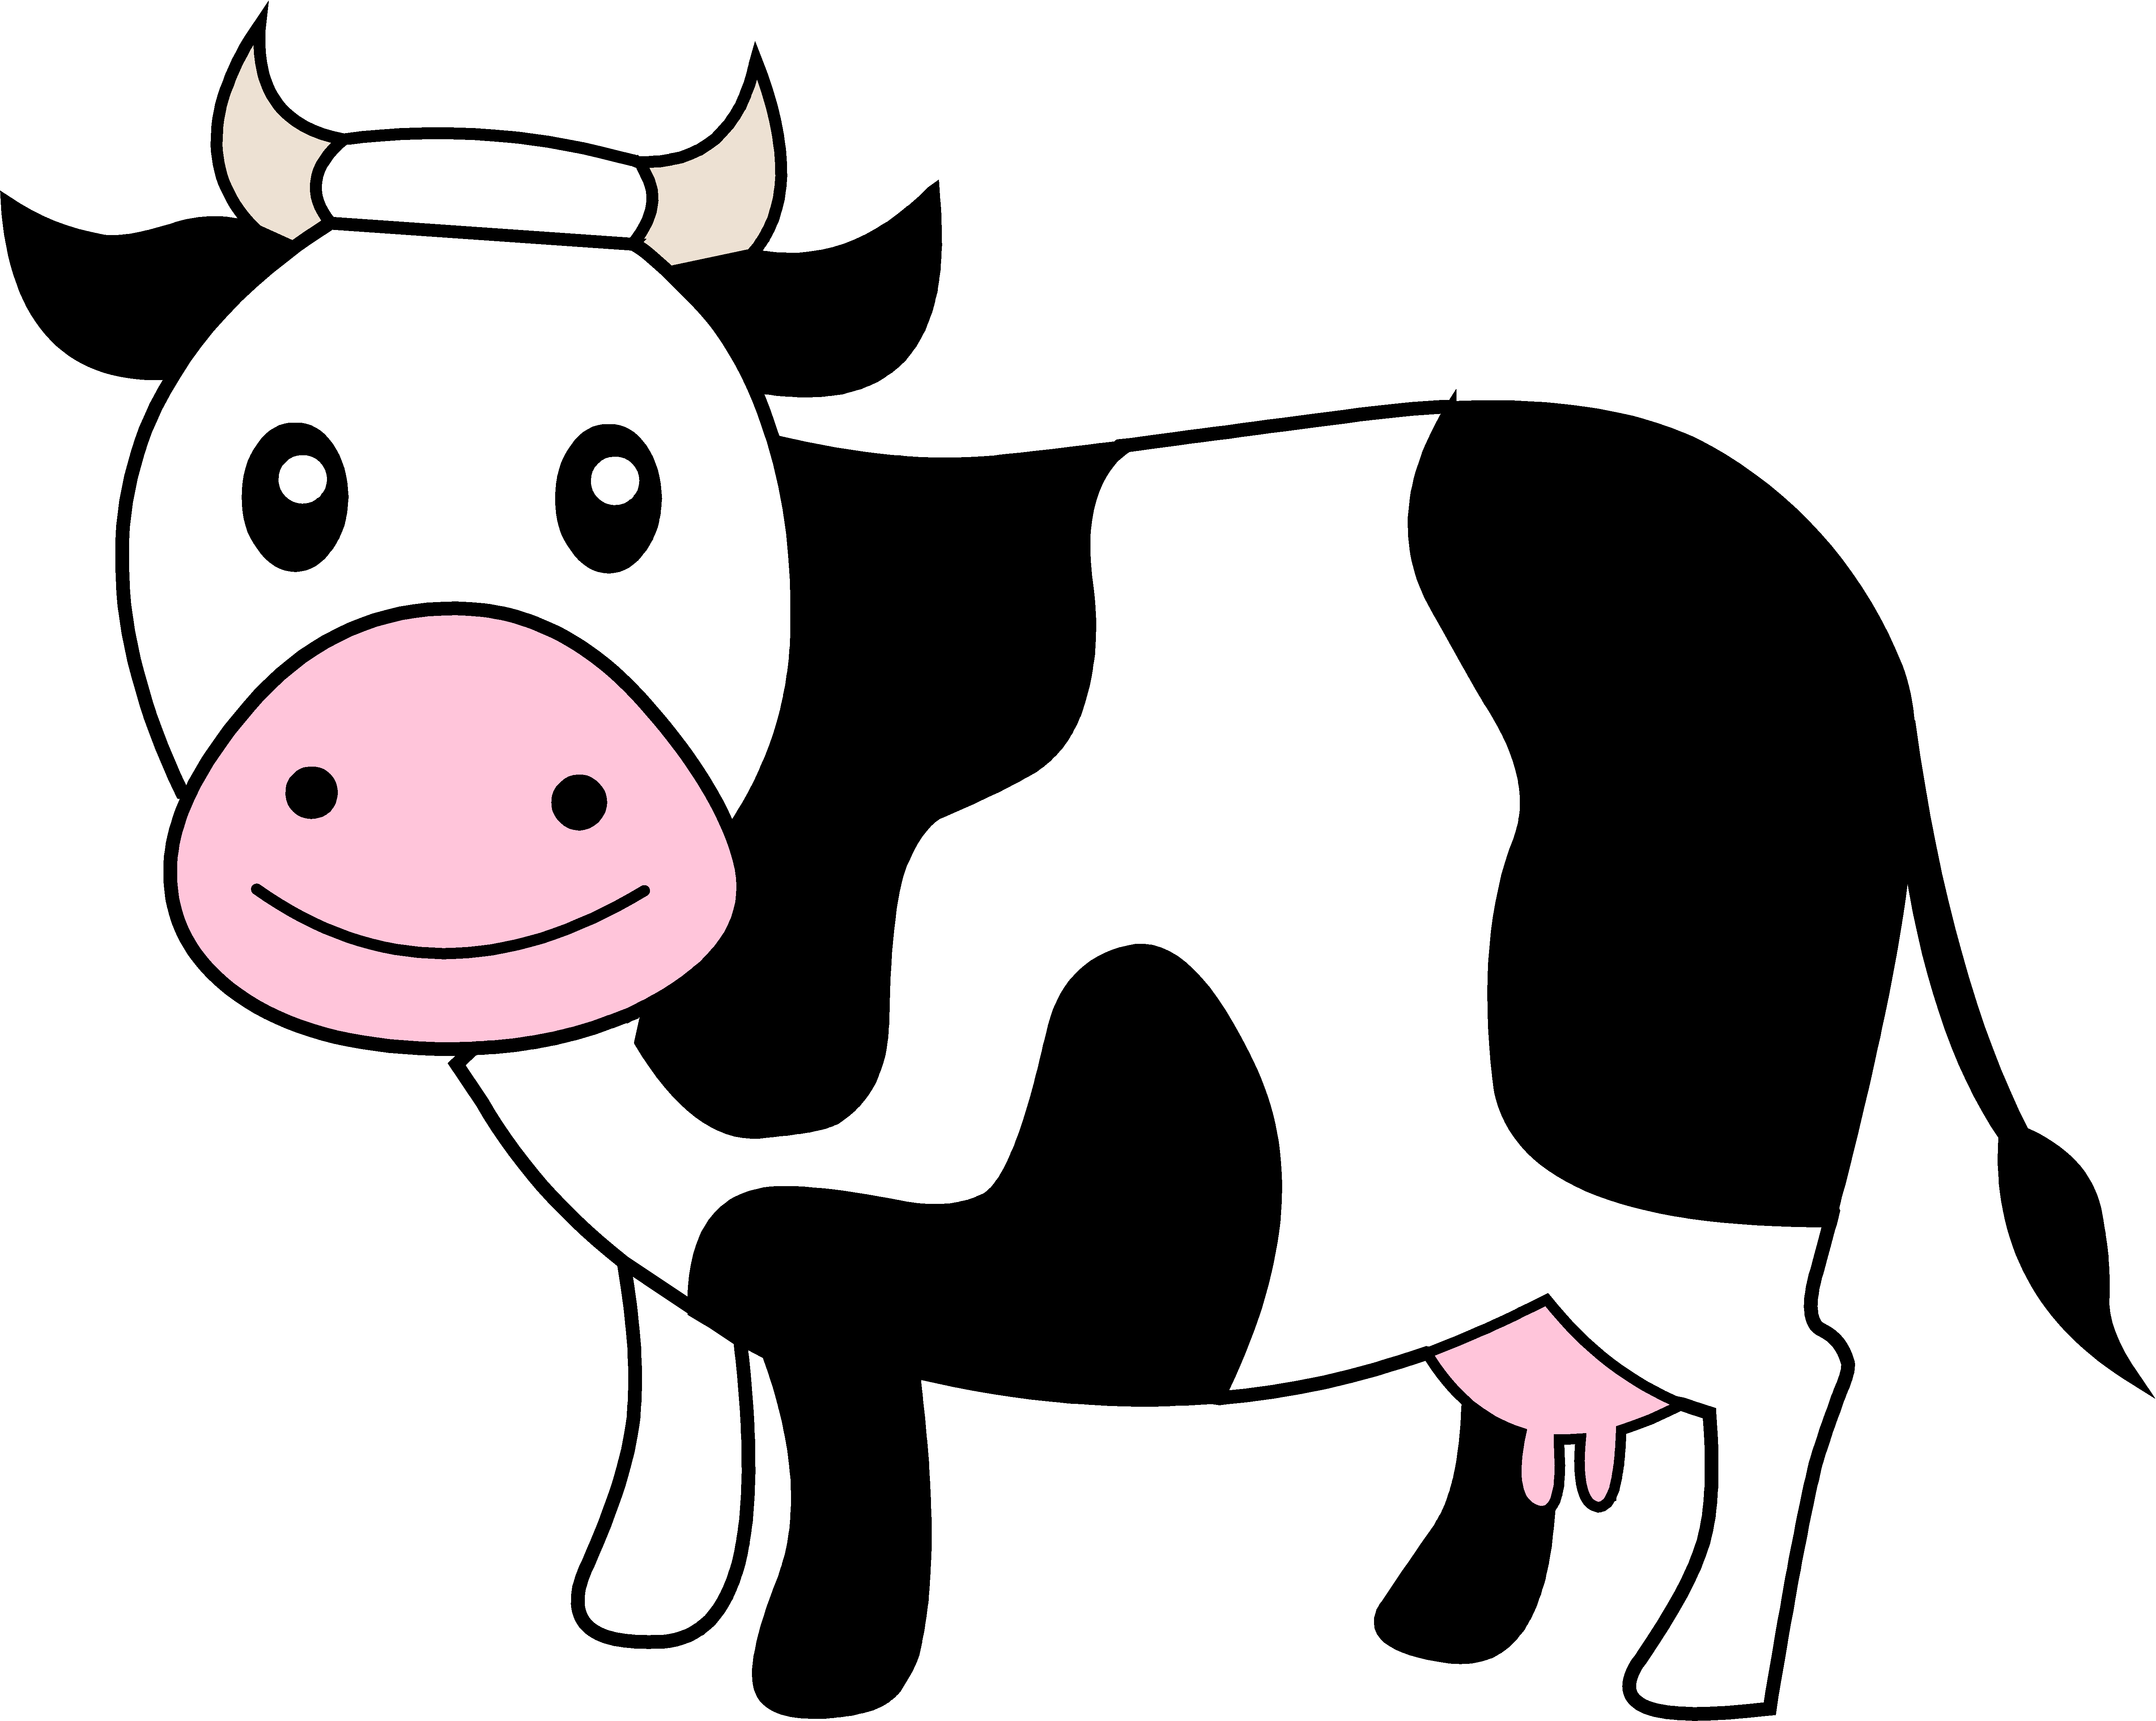 Cow Face PNG